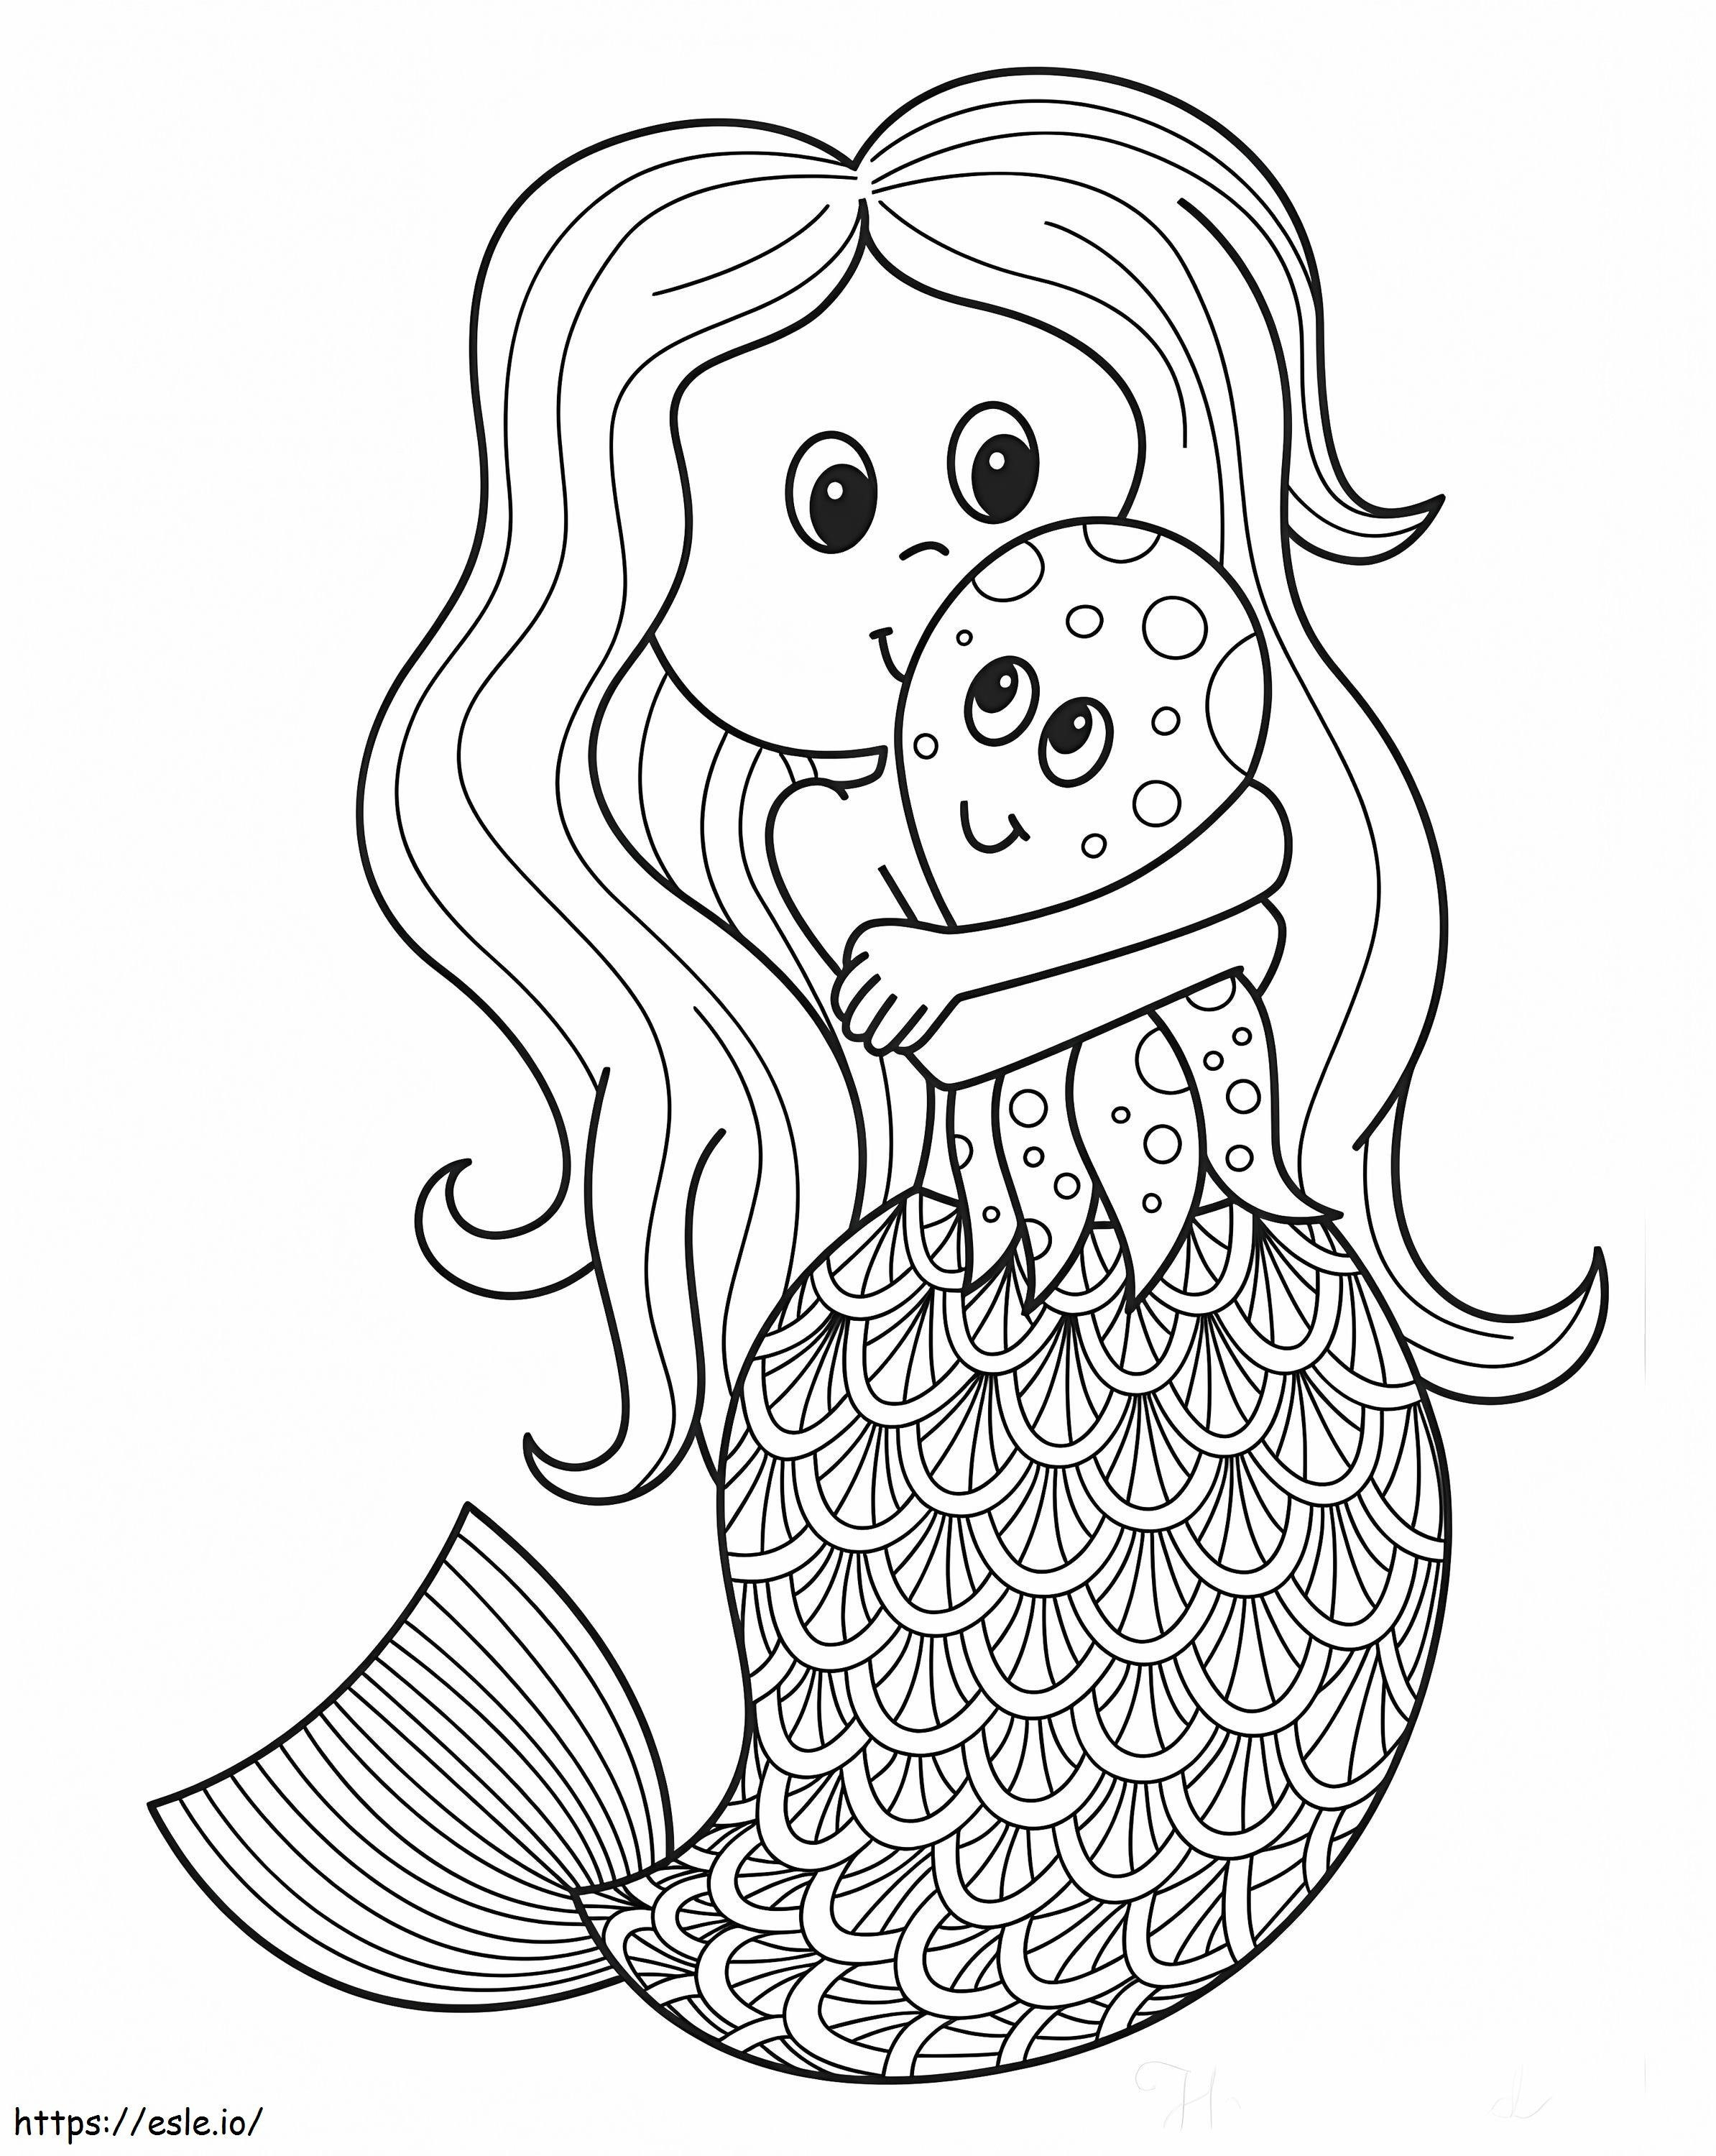 Mermaid And Octopus coloring page